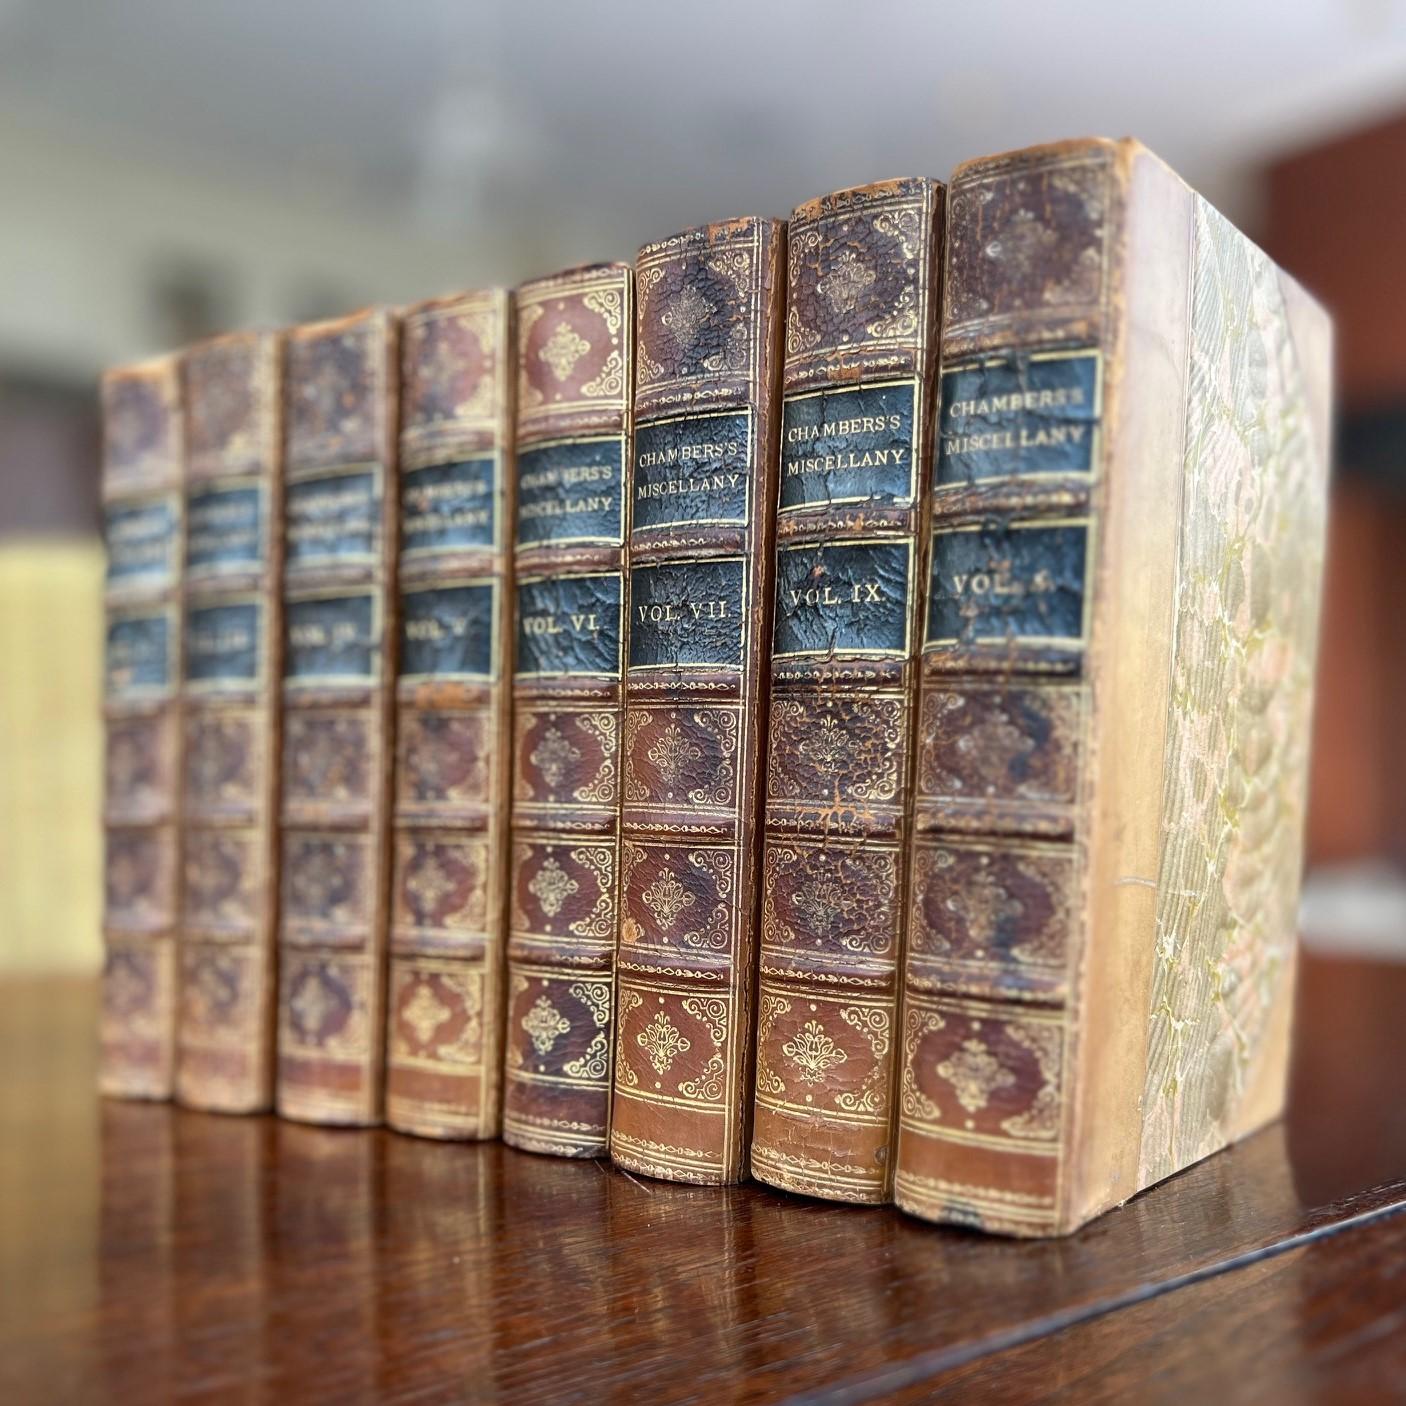 8 of 10 volumes (2-7 and 9-10) Chambers's Miscellany of Instructive & Entertaining Tracts New and Revised Edition, printed 1872 by W. & R. Chambers, Edinburgh. Uniformly bound in half calf with marbled boards. Leather spines have blind and gilt